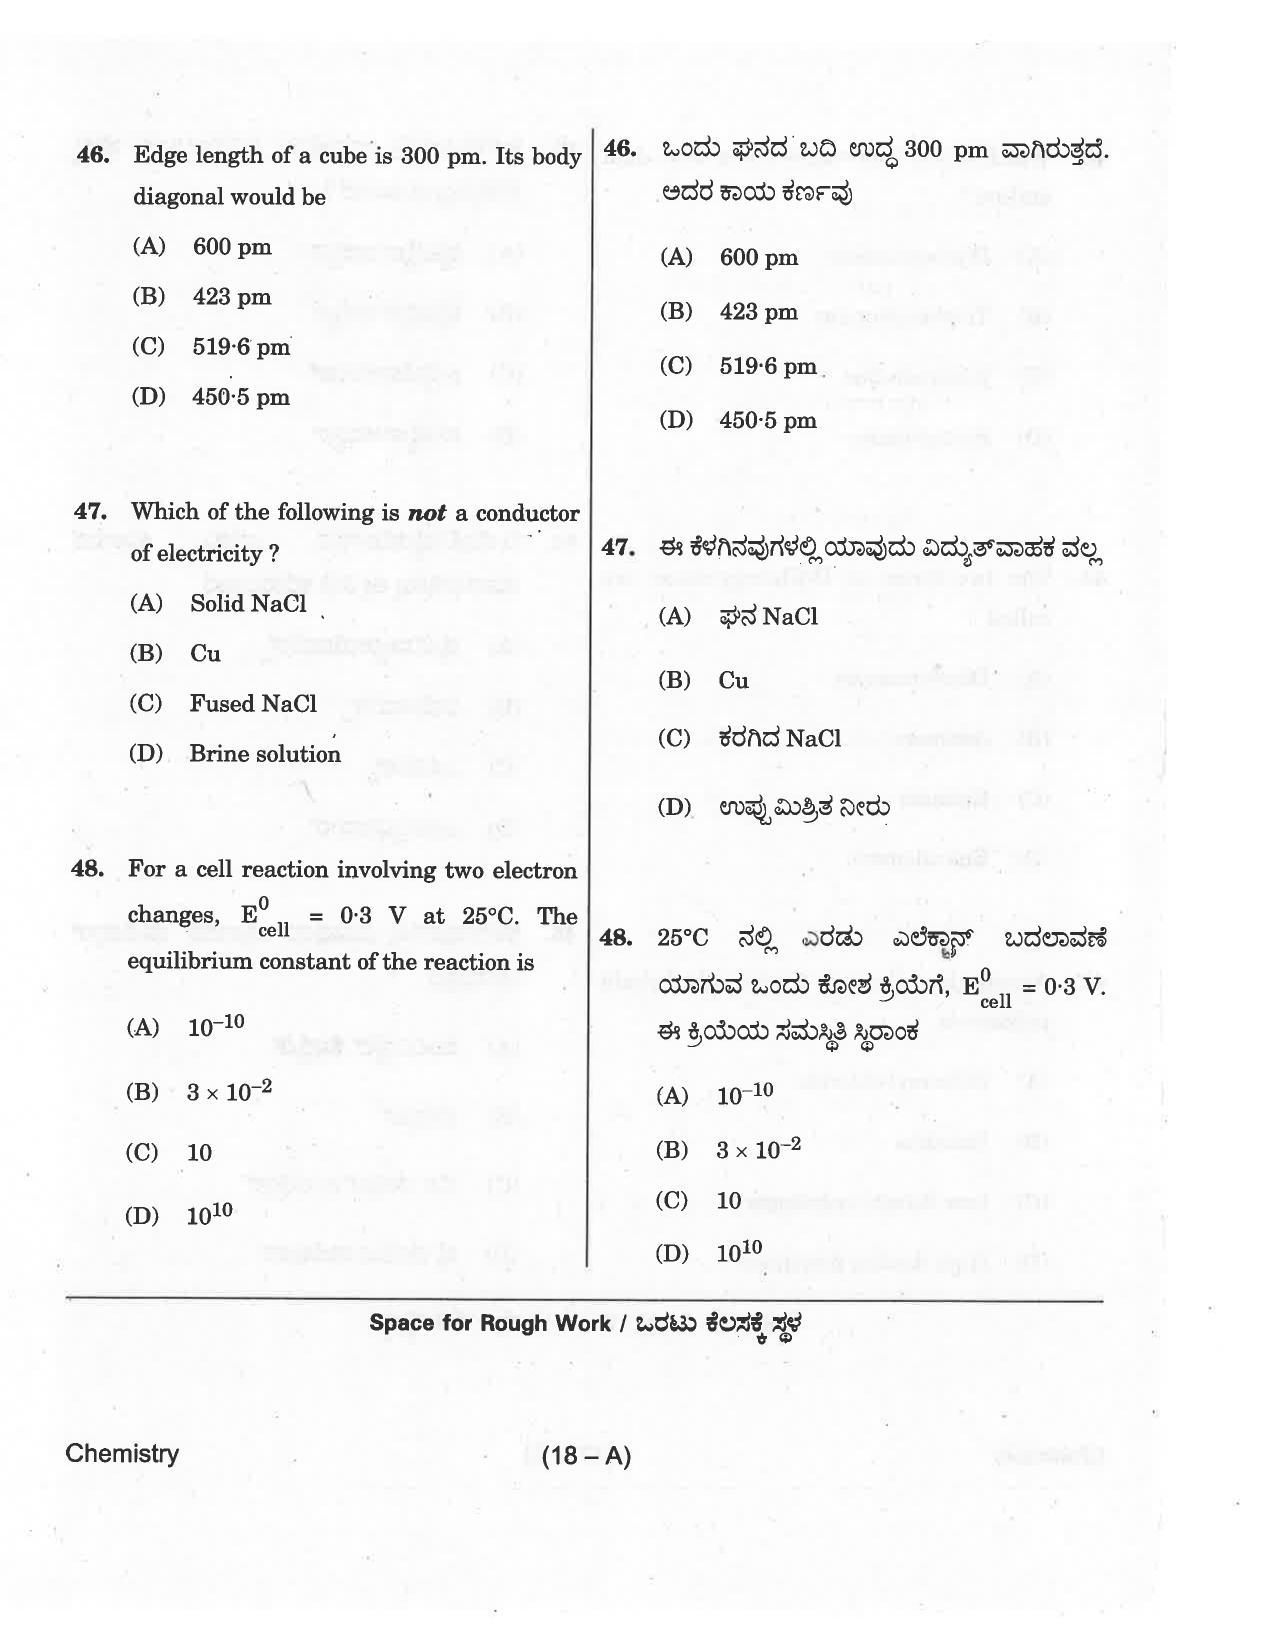 KCET Chemistry 2018 Question Papers - Page 18